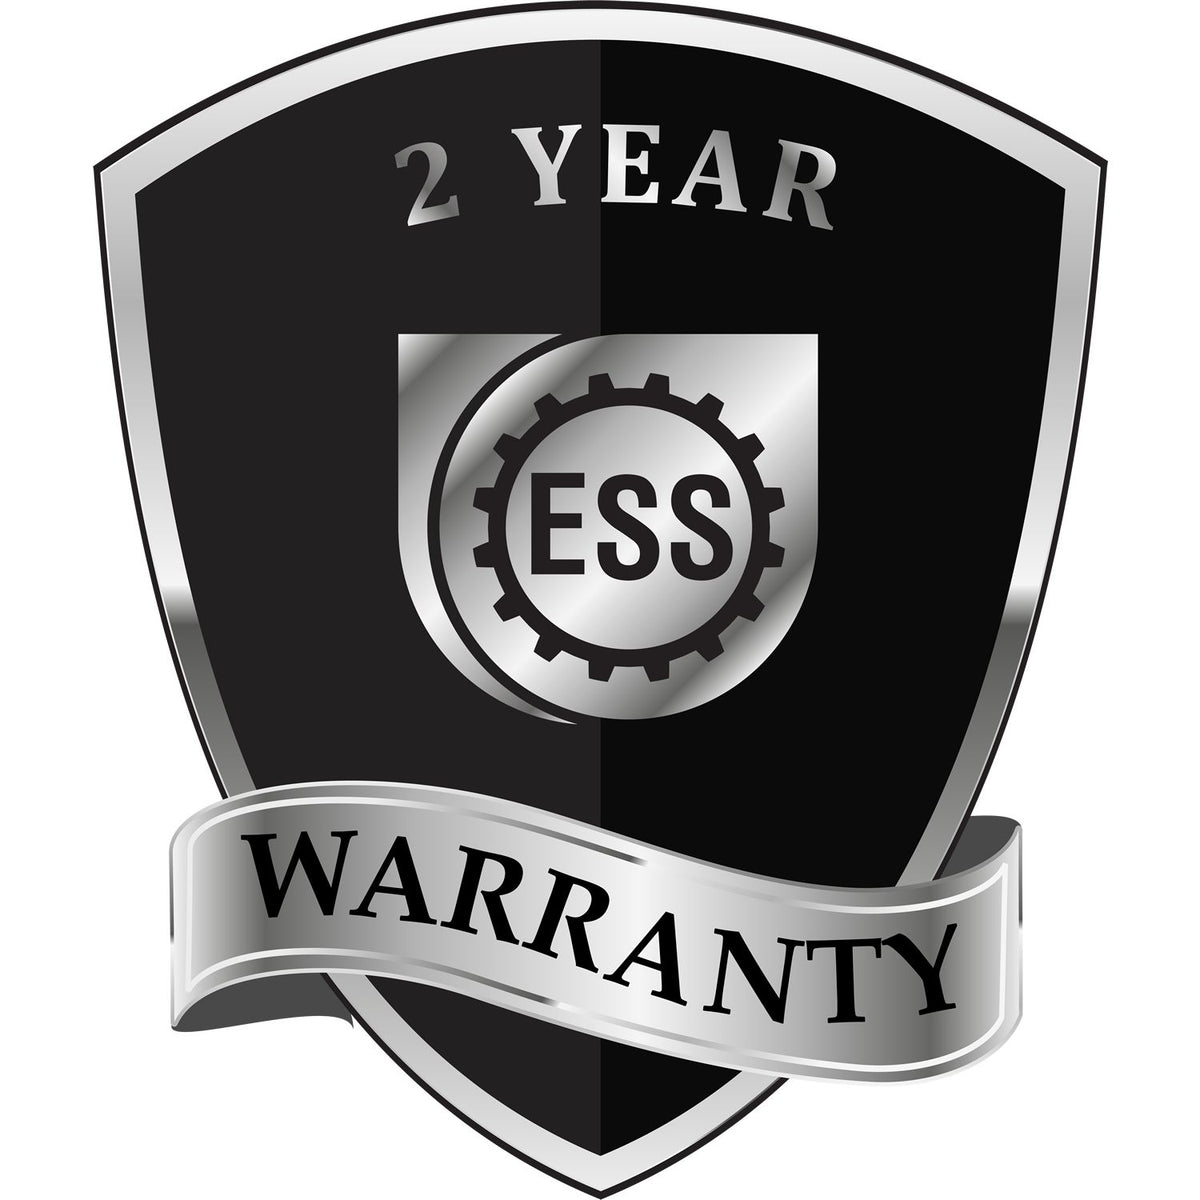 A black and silver badge or emblem showing warranty information for the Hybrid Maine Landscape Architect Seal